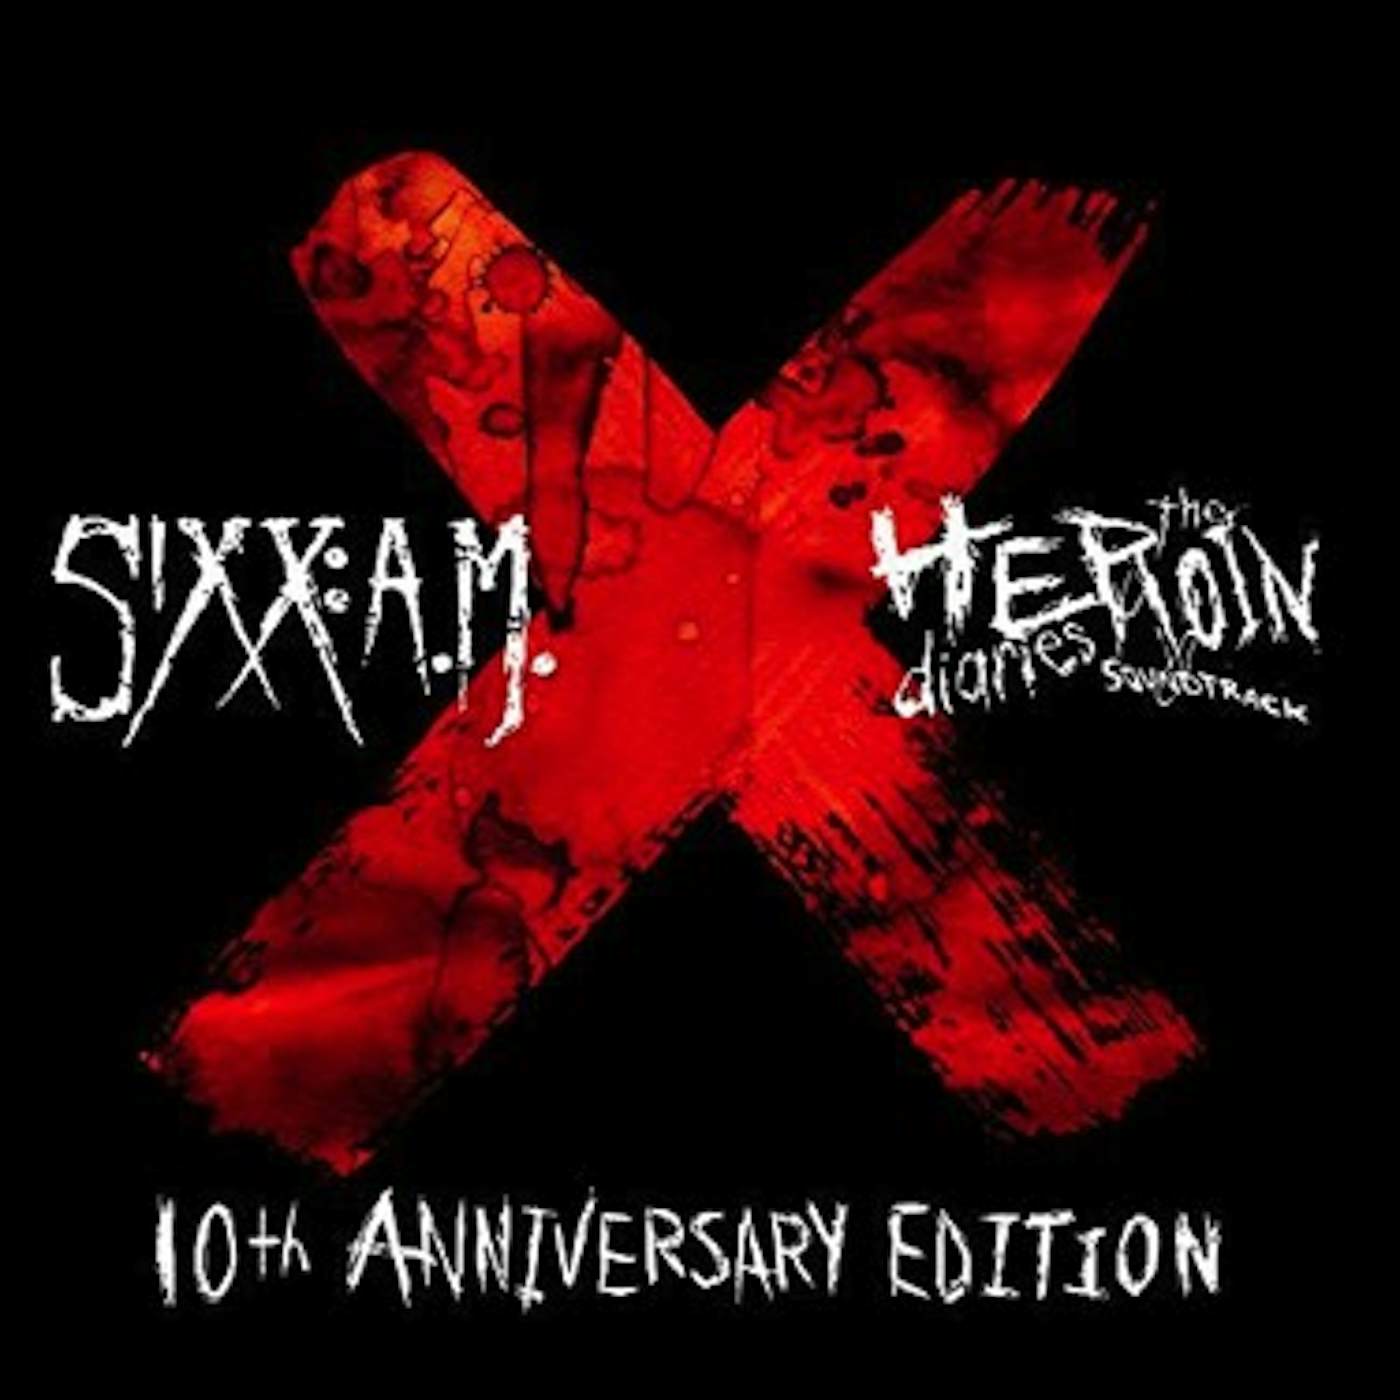 Sixx:A.M. Heroin Diaries Soundtrack: 10th Anniversary Edition Vinyl Record